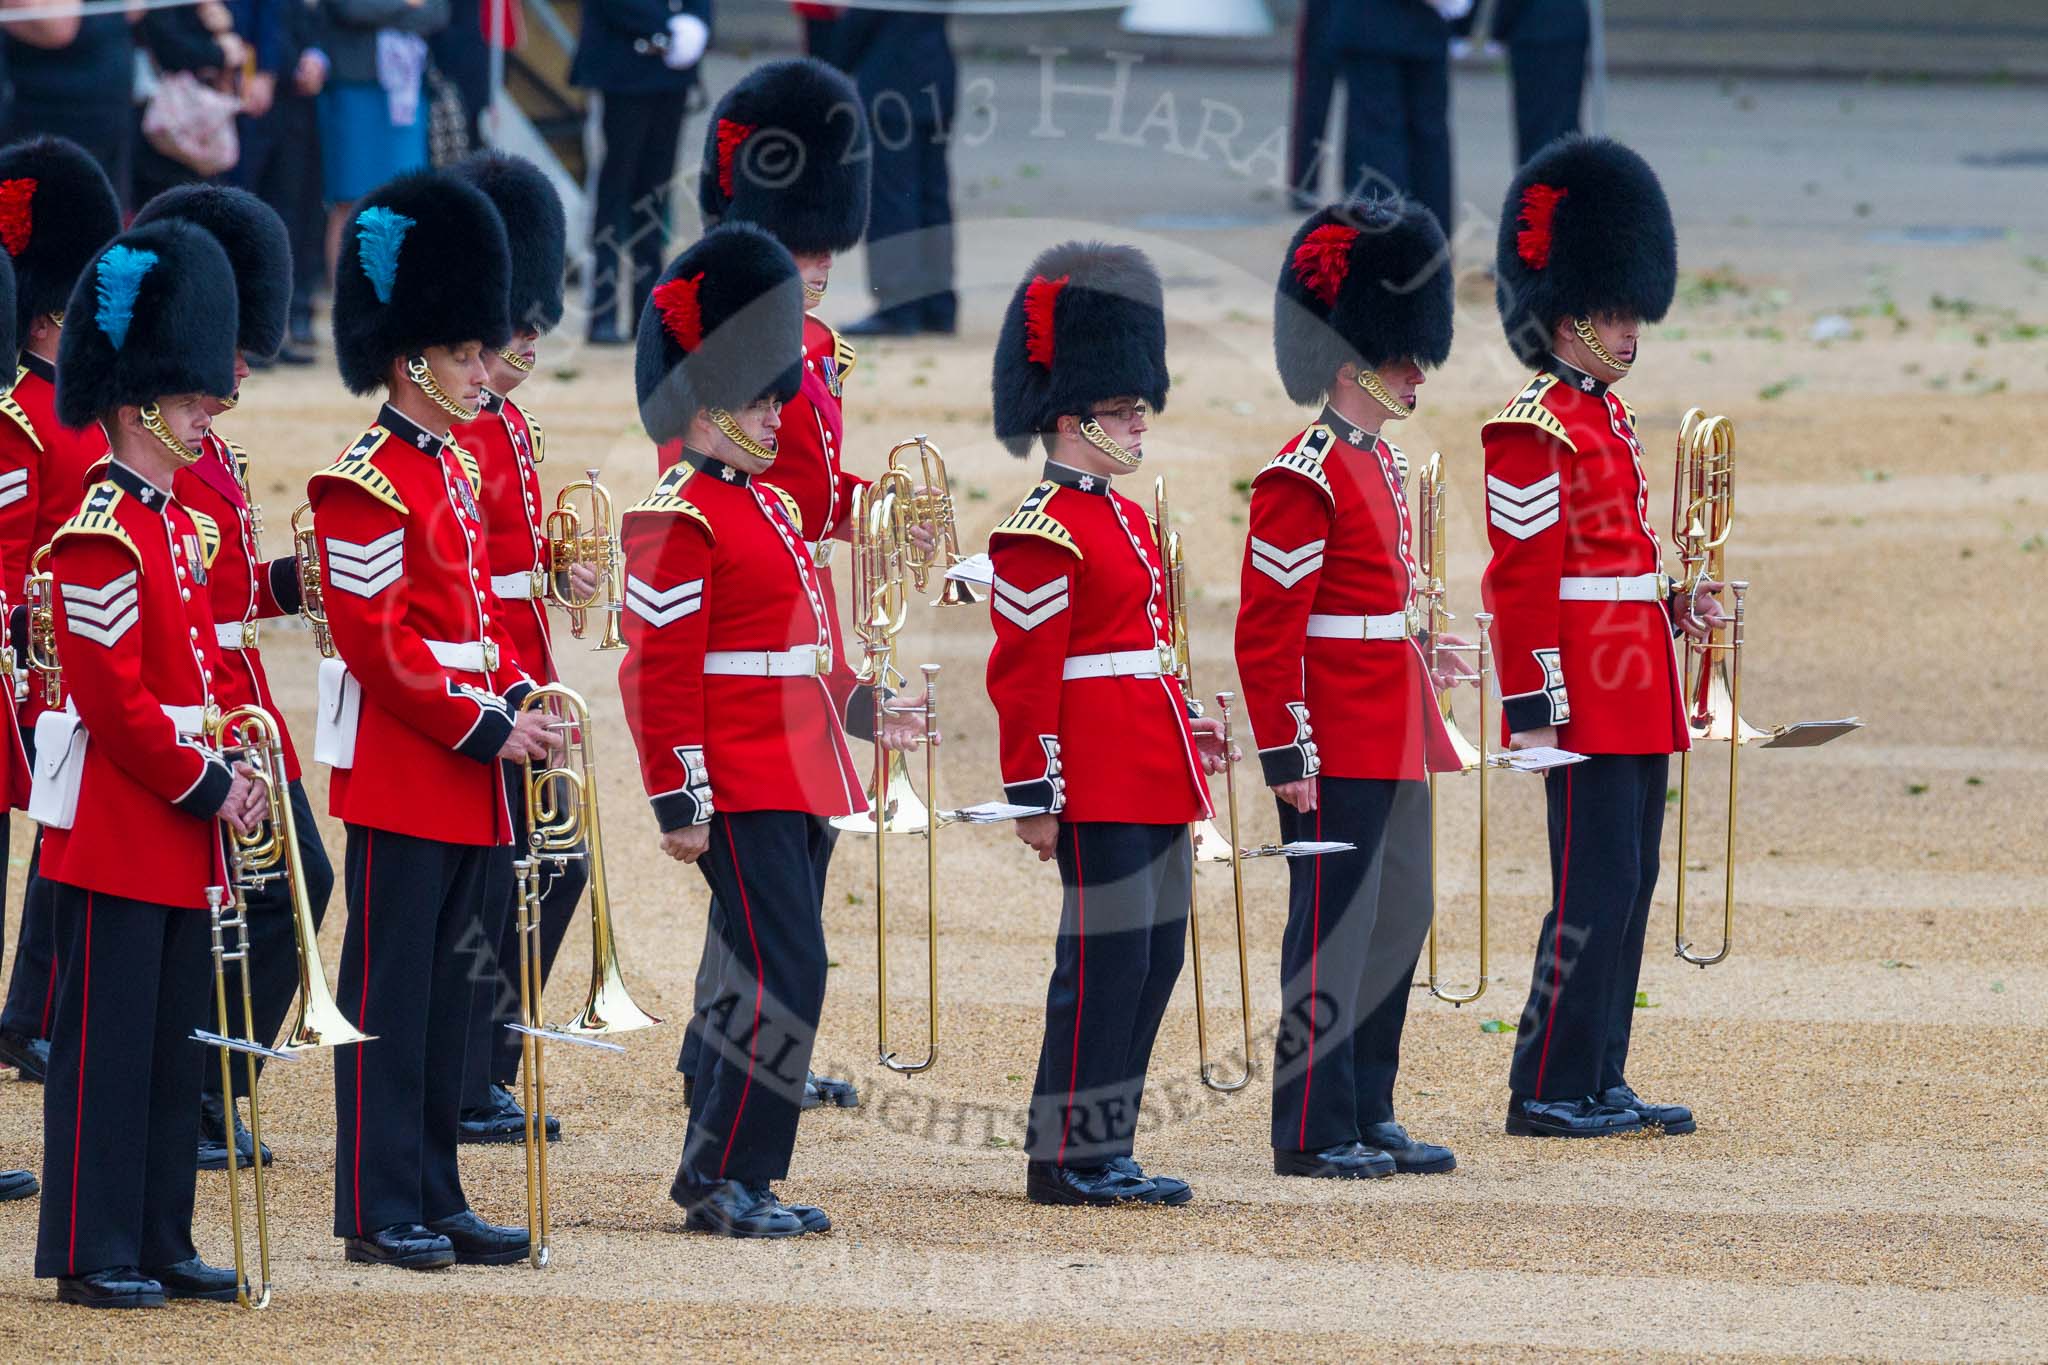 Trooping the Colour 2015. Image #91, 13 June 2015 10:27 Horse Guards Parade, London, UK